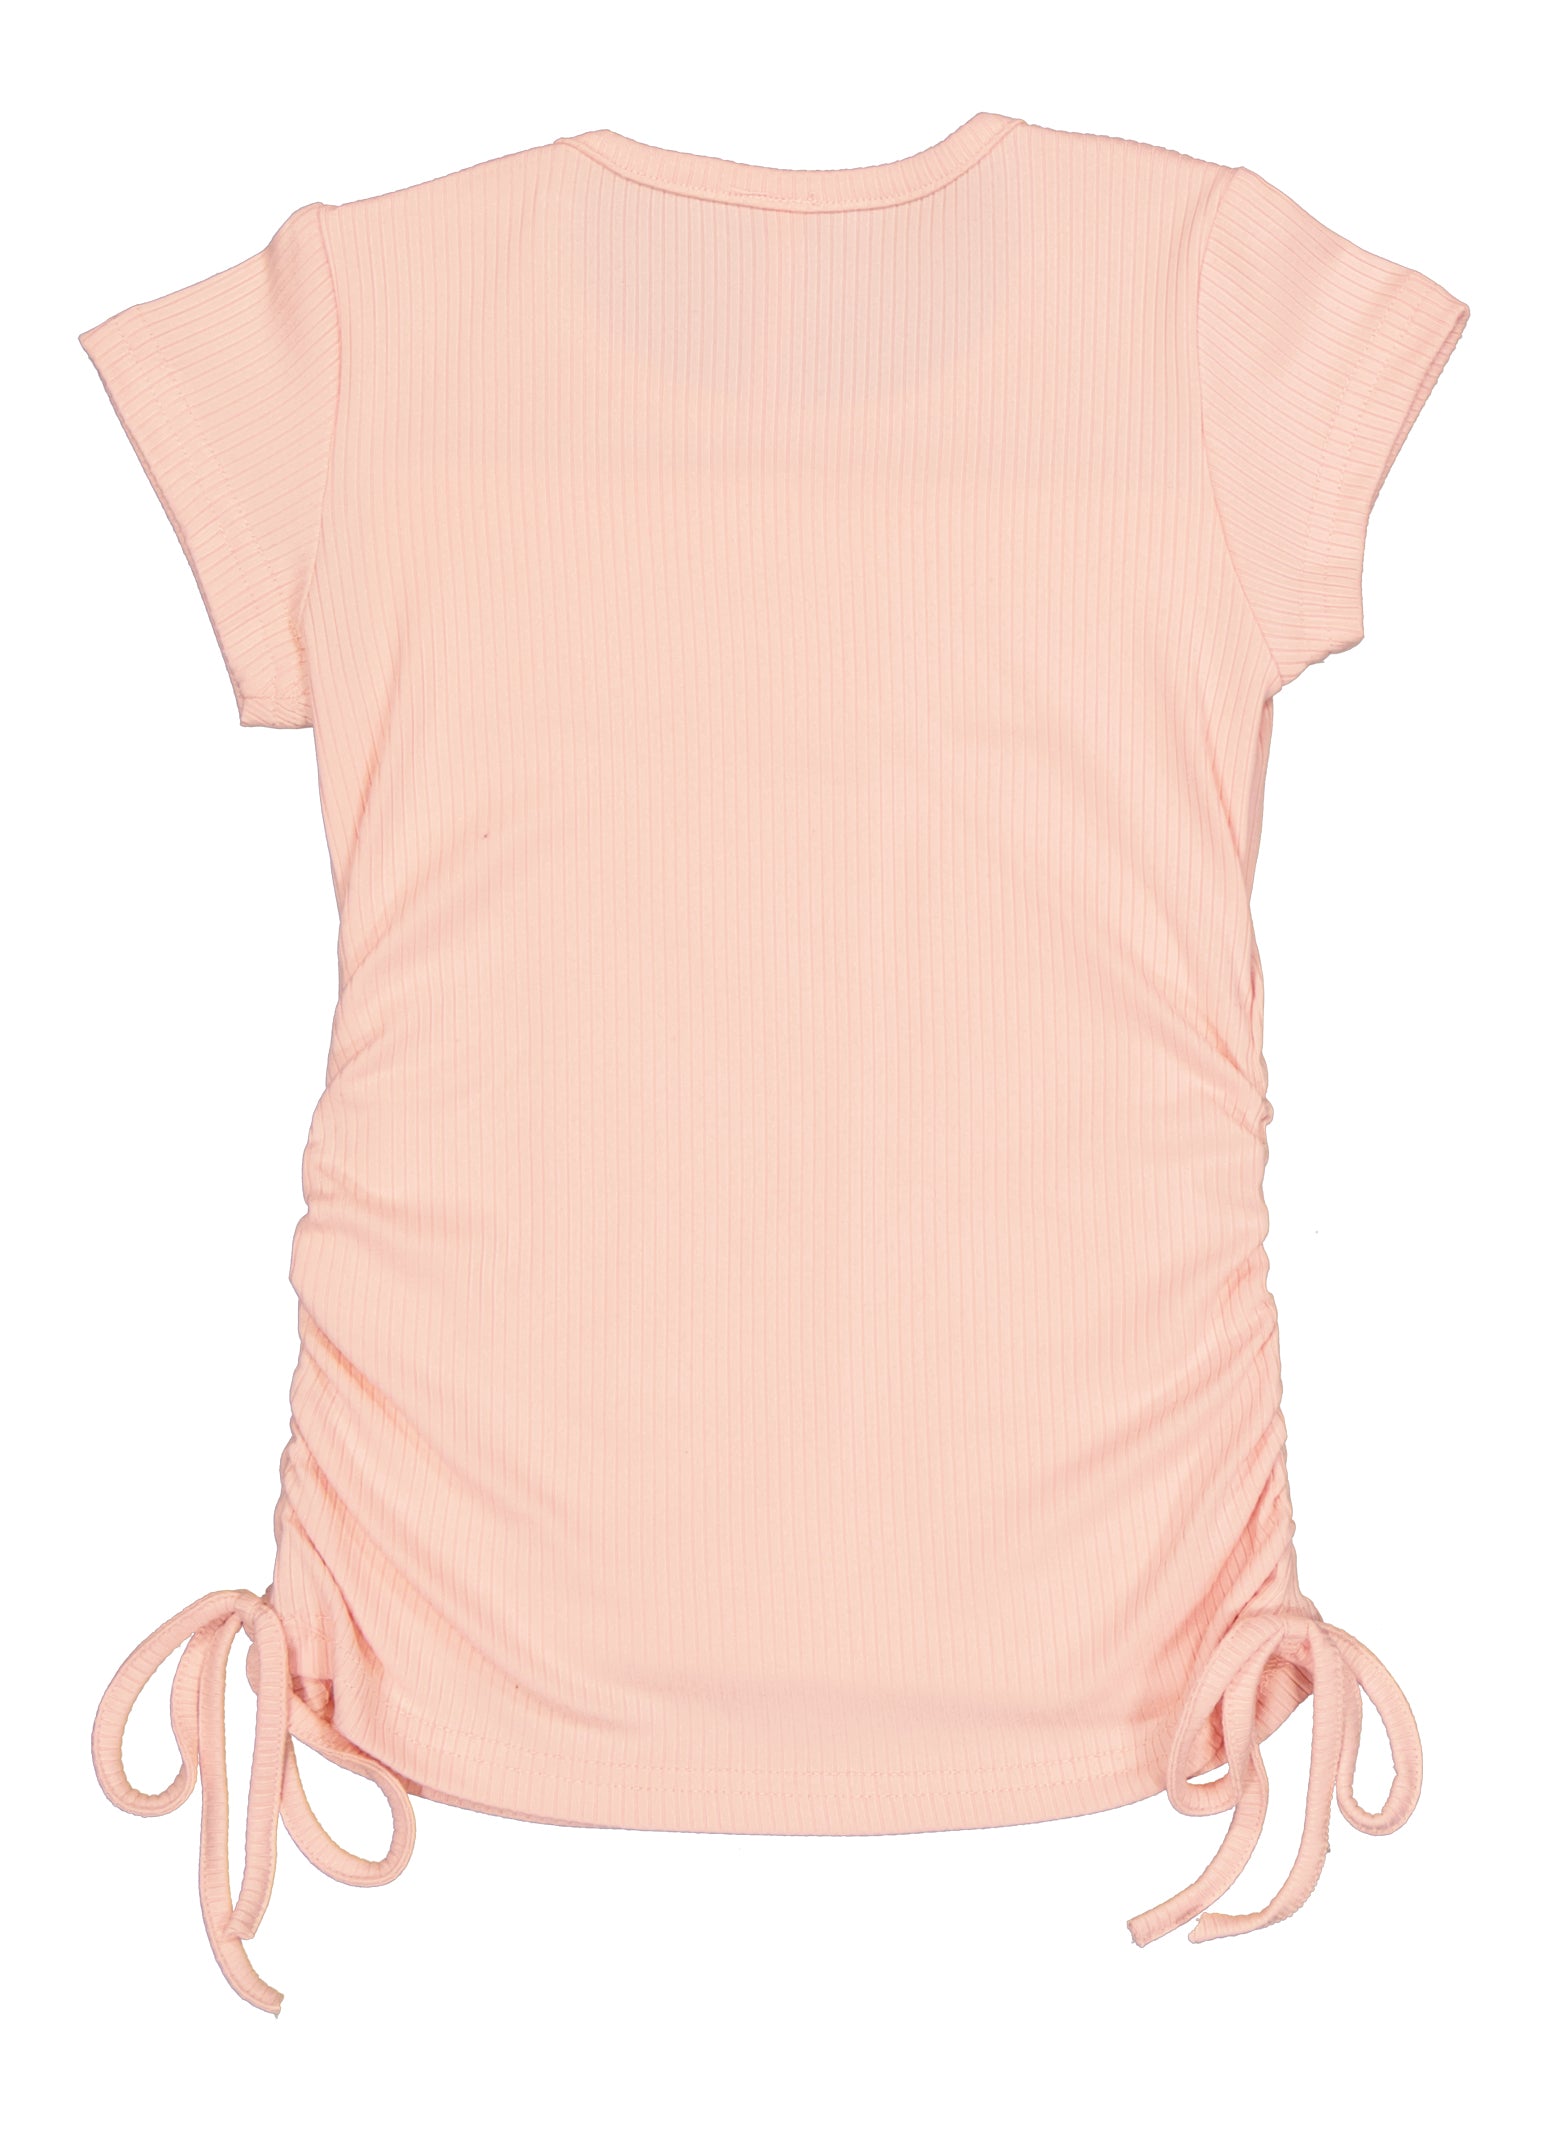 Little Girls Rib Knit Ruched Tee with Necklace, Pink, Size 4